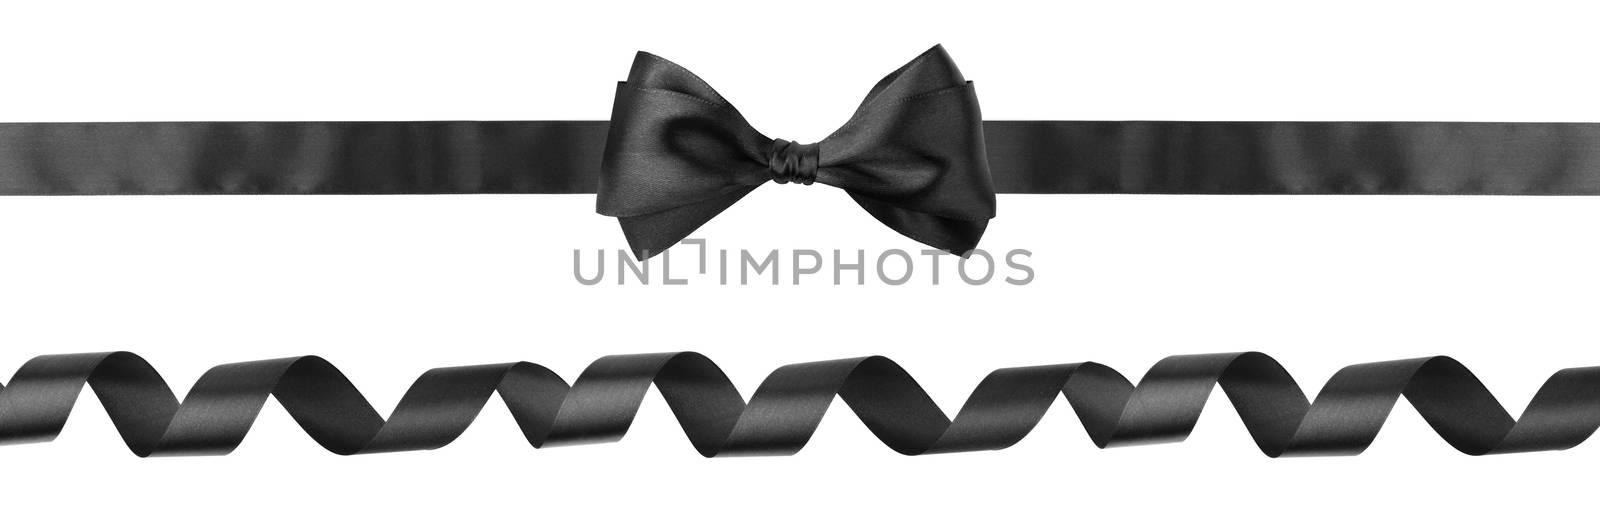 Black ribbon bow isolated on white by destillat